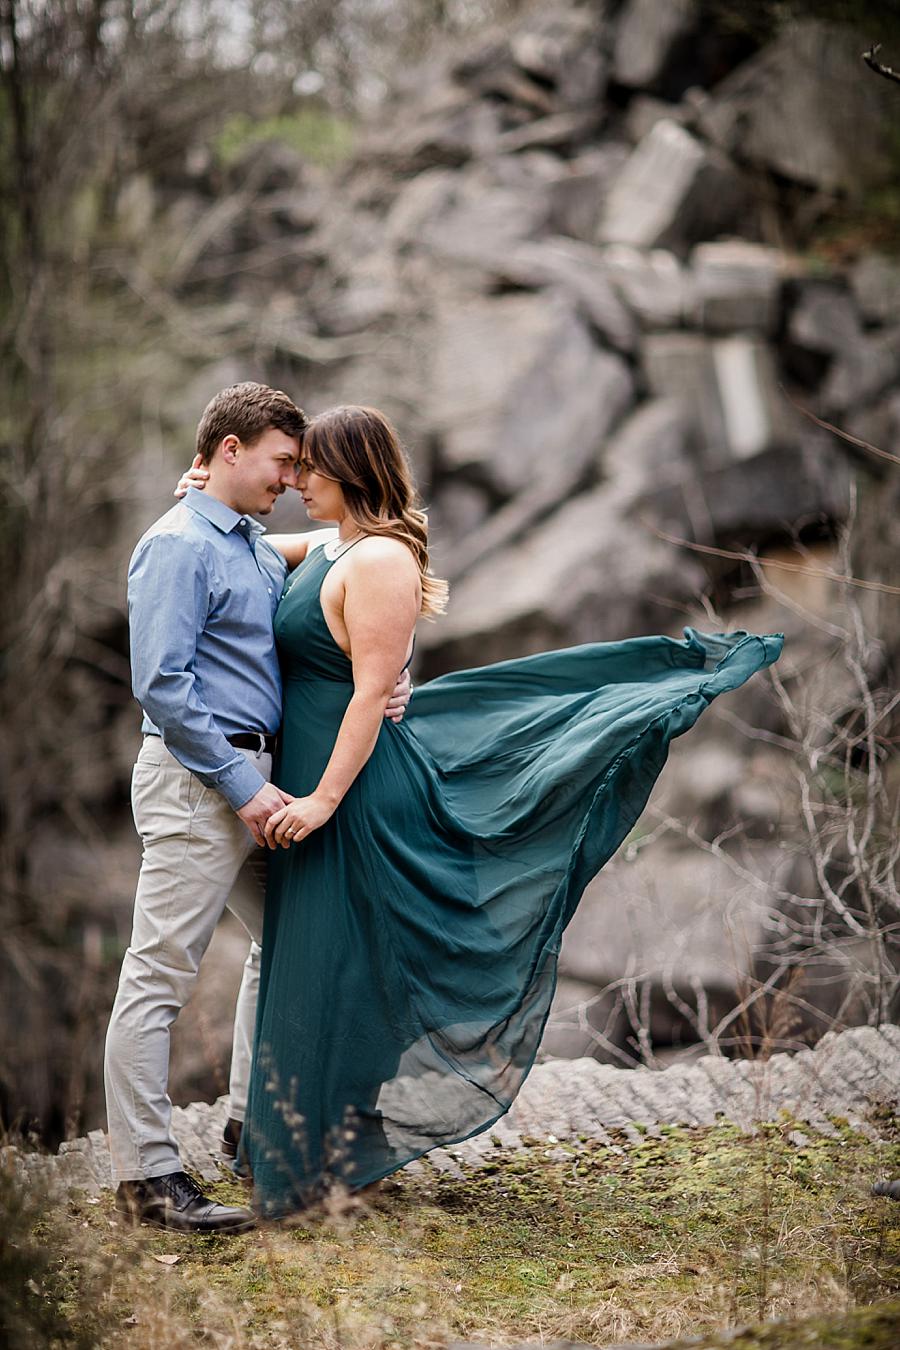 Dress blowing in the wind at this Knoxville engagement session at The Quarry by Knoxville Wedding Photographer, Amanda May Photos.